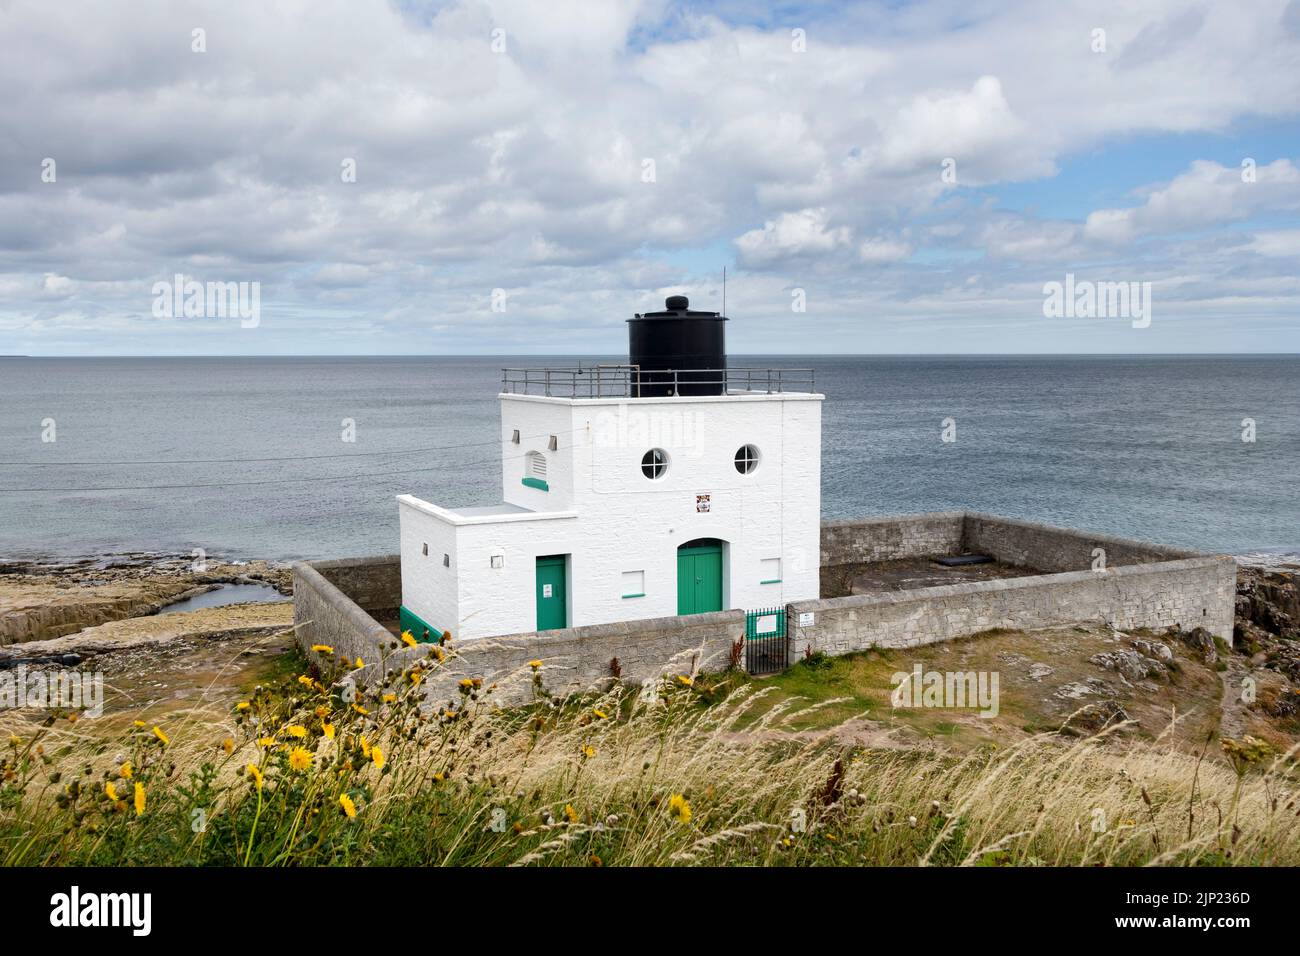 Bamburgh Lighthouse (noto anche come Black Rocks Point Lighthouse), Bamburgh, Northumberland, Inghilterra, Regno Unito Foto Stock